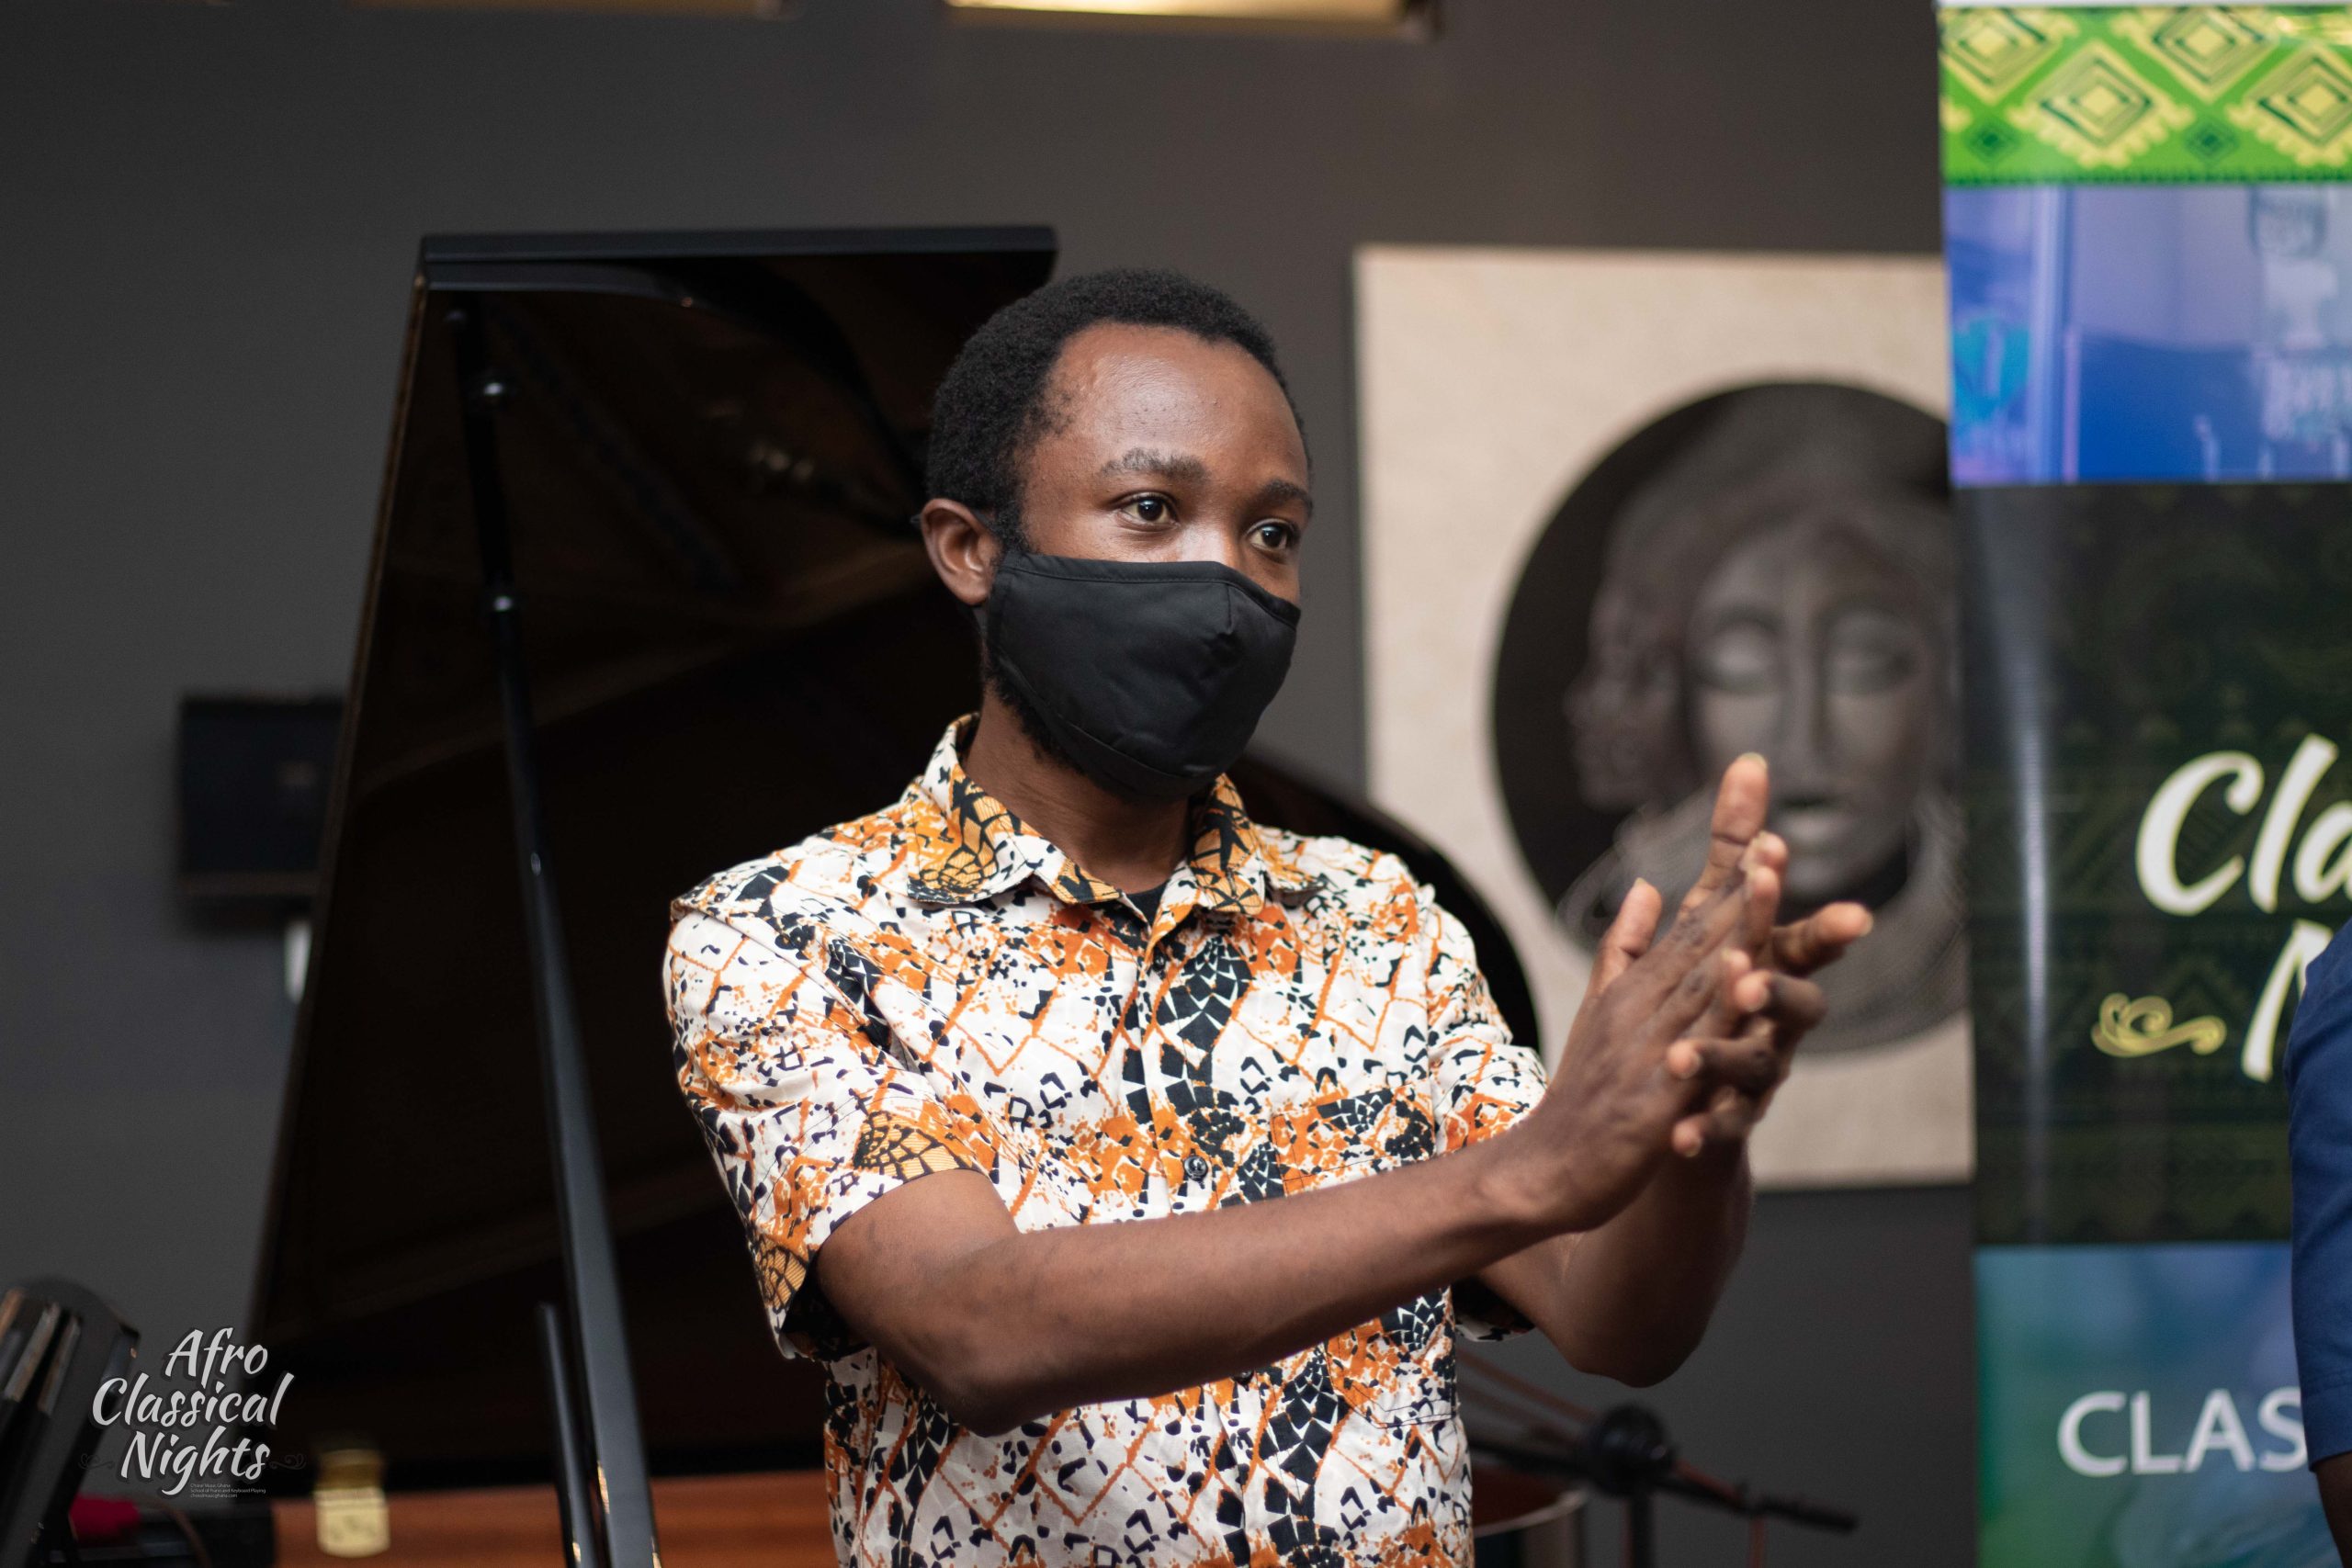 Afro Classical Nights’ final concert for 2021 comes off at Ghana Club